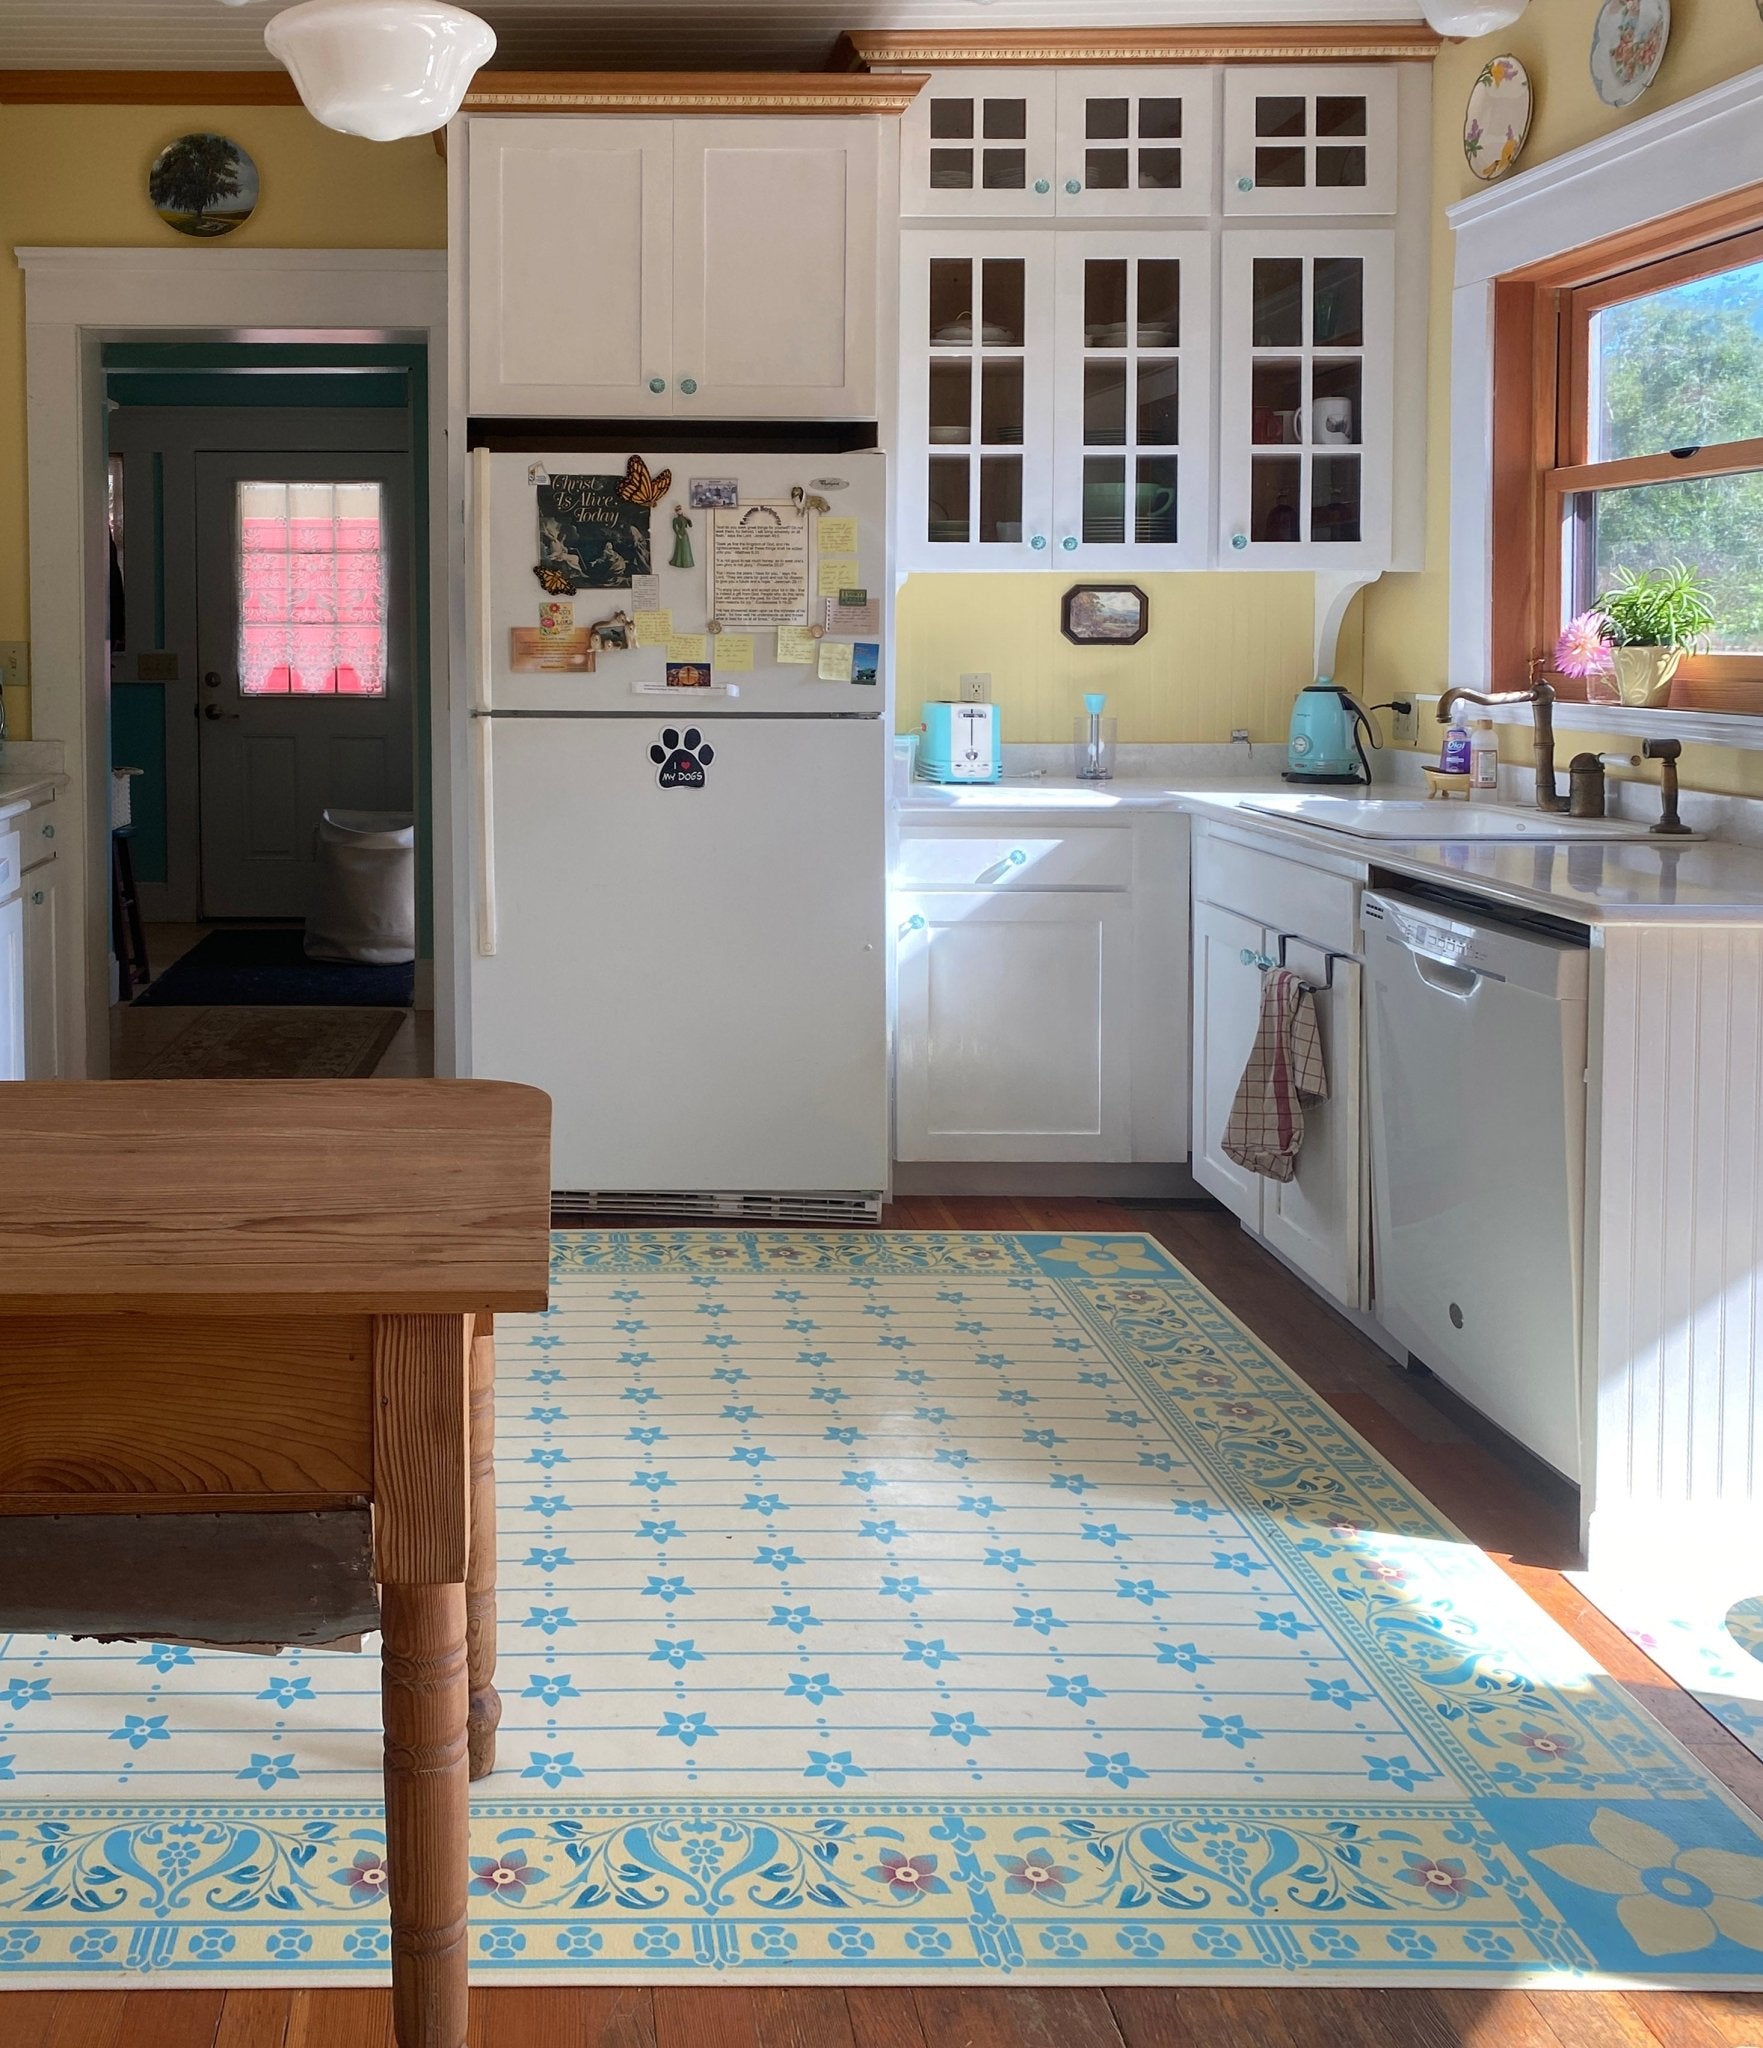 An in-situ photo of this floorcloth in a lovely farmhouse kitchen with Nostalgia appliances in blue, with a matching blue in the floorcloth motifs.